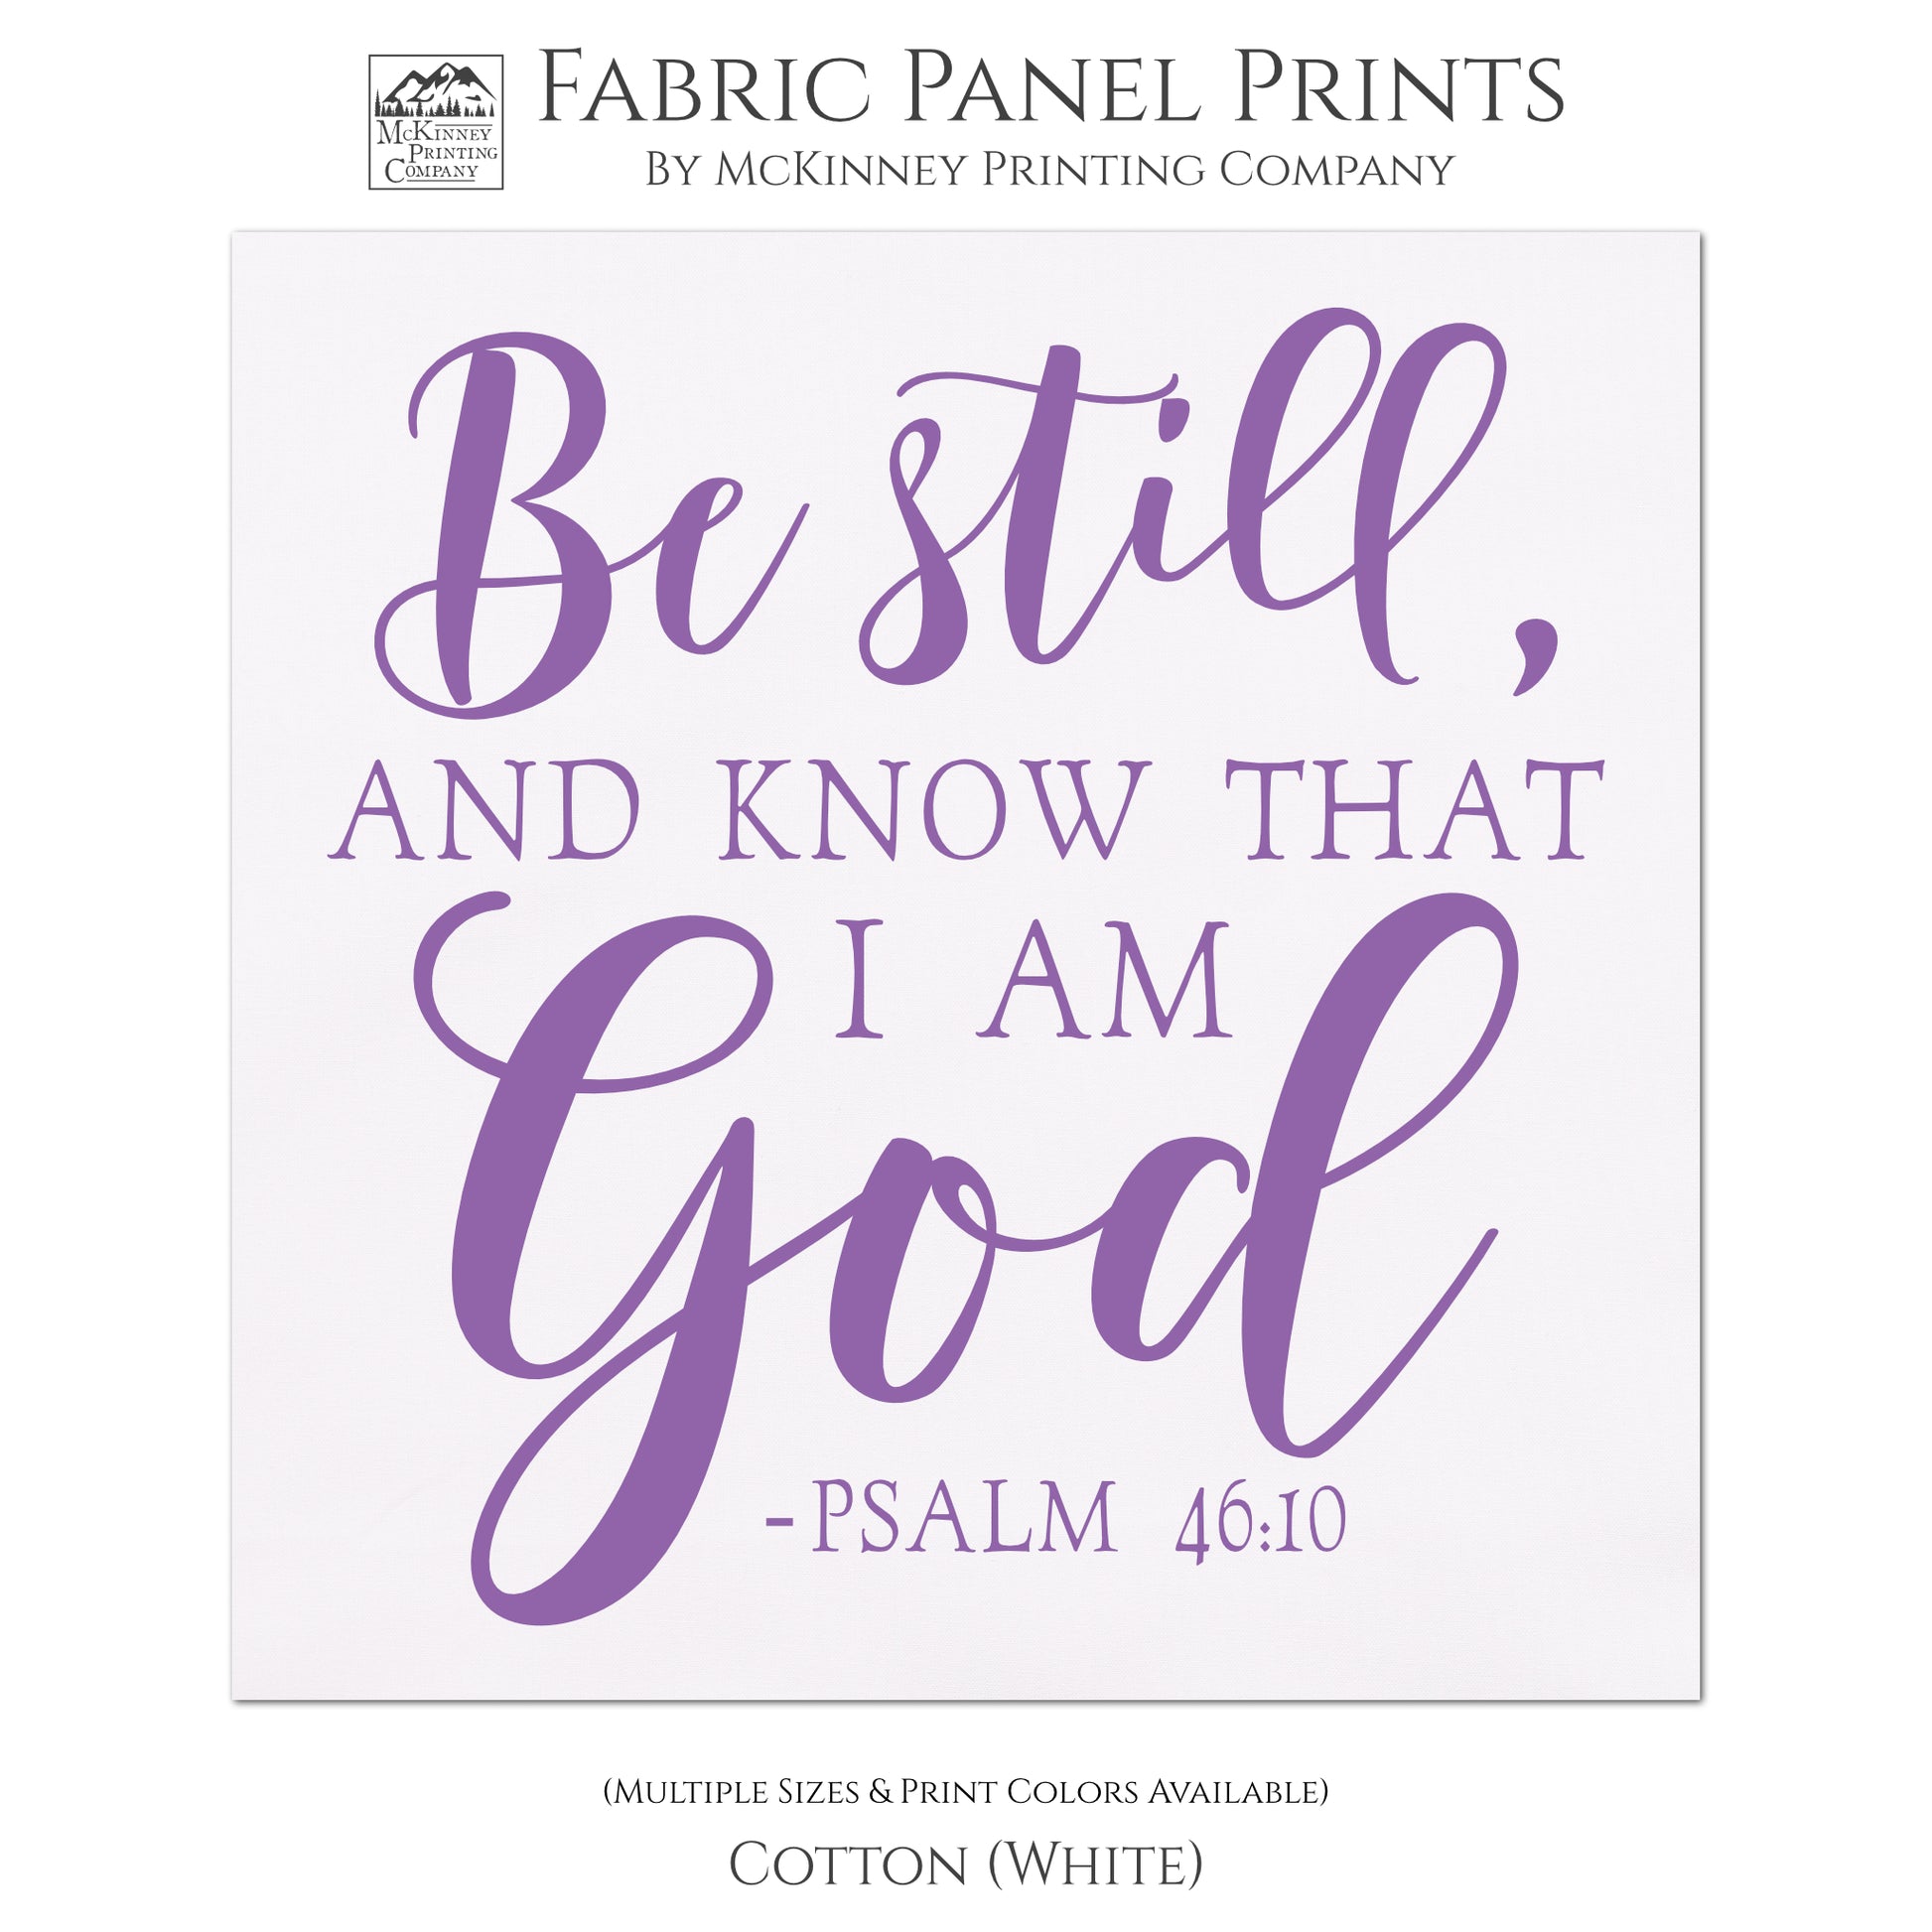 Be still and know that I am God - Psalm 46:10 - Fabric Panel Print, Quilt Block, Large Print Fabric - Cotton, White